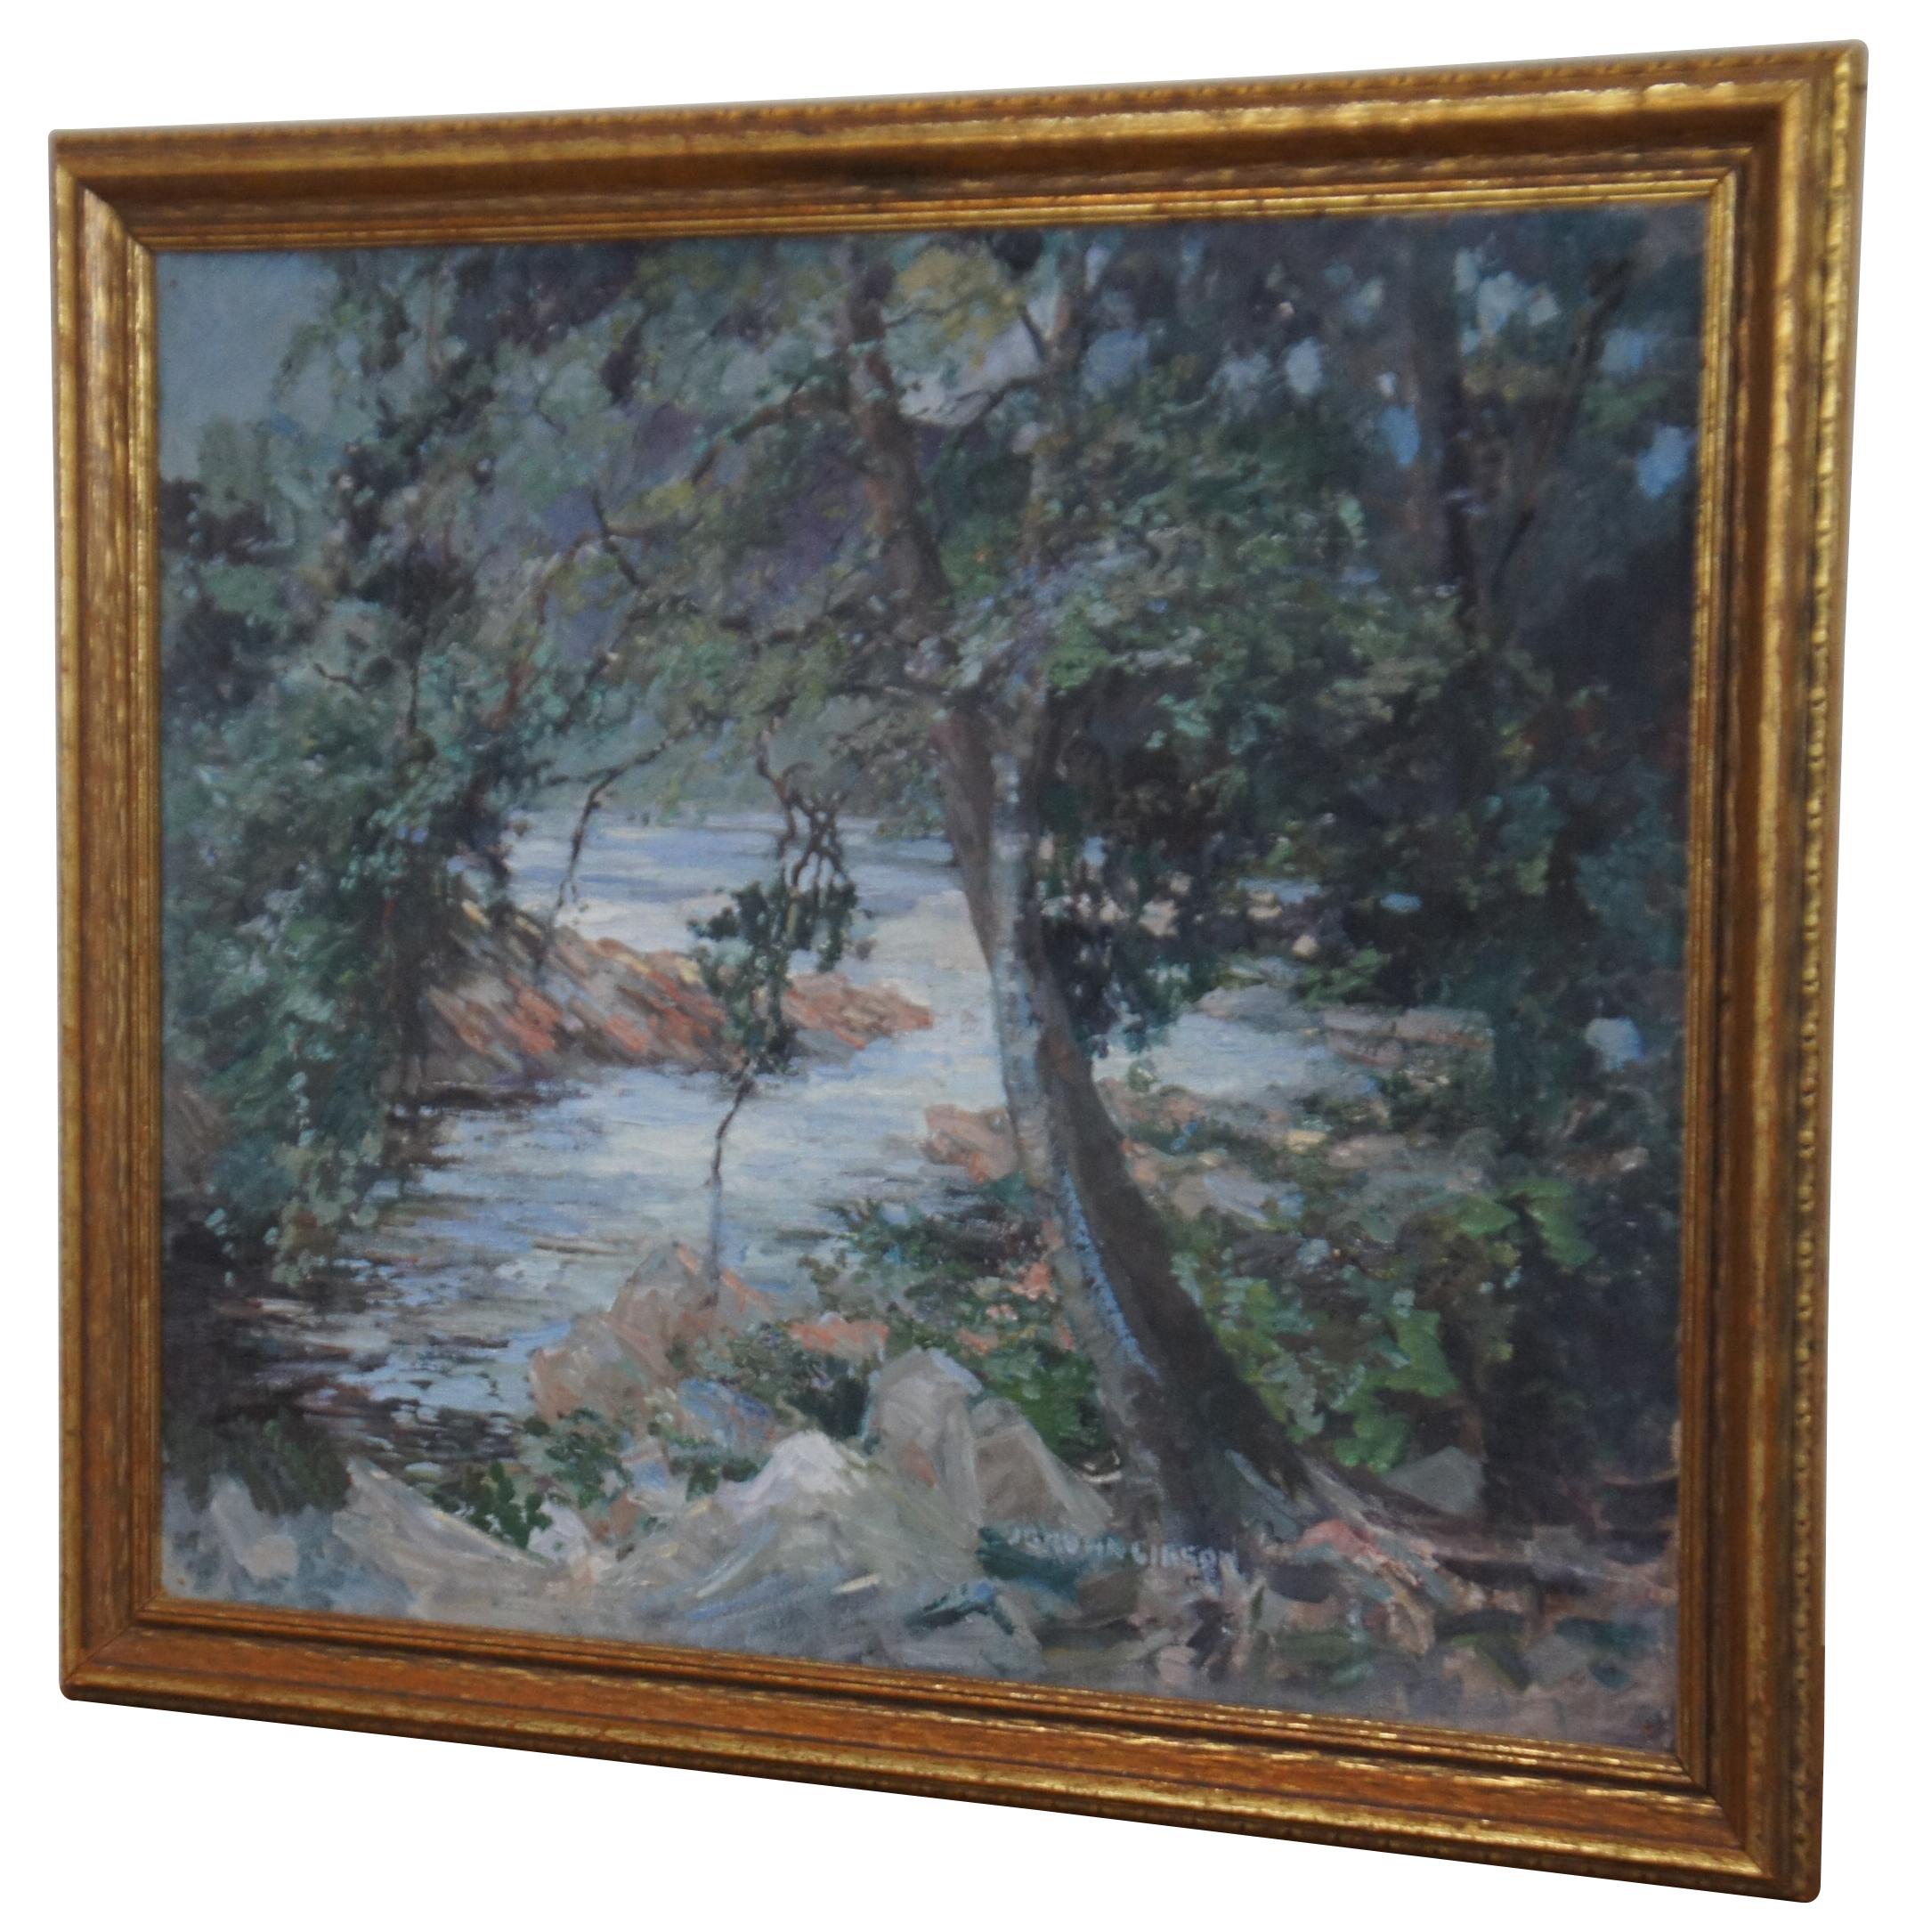 Antique James Brown Gibson impressionist oil painting on canvas featuring a river landscape bending through the forest, most likely the Dochart River in Scotland.

Signed by artist on front of canvas and back of frame, canvas marked London on